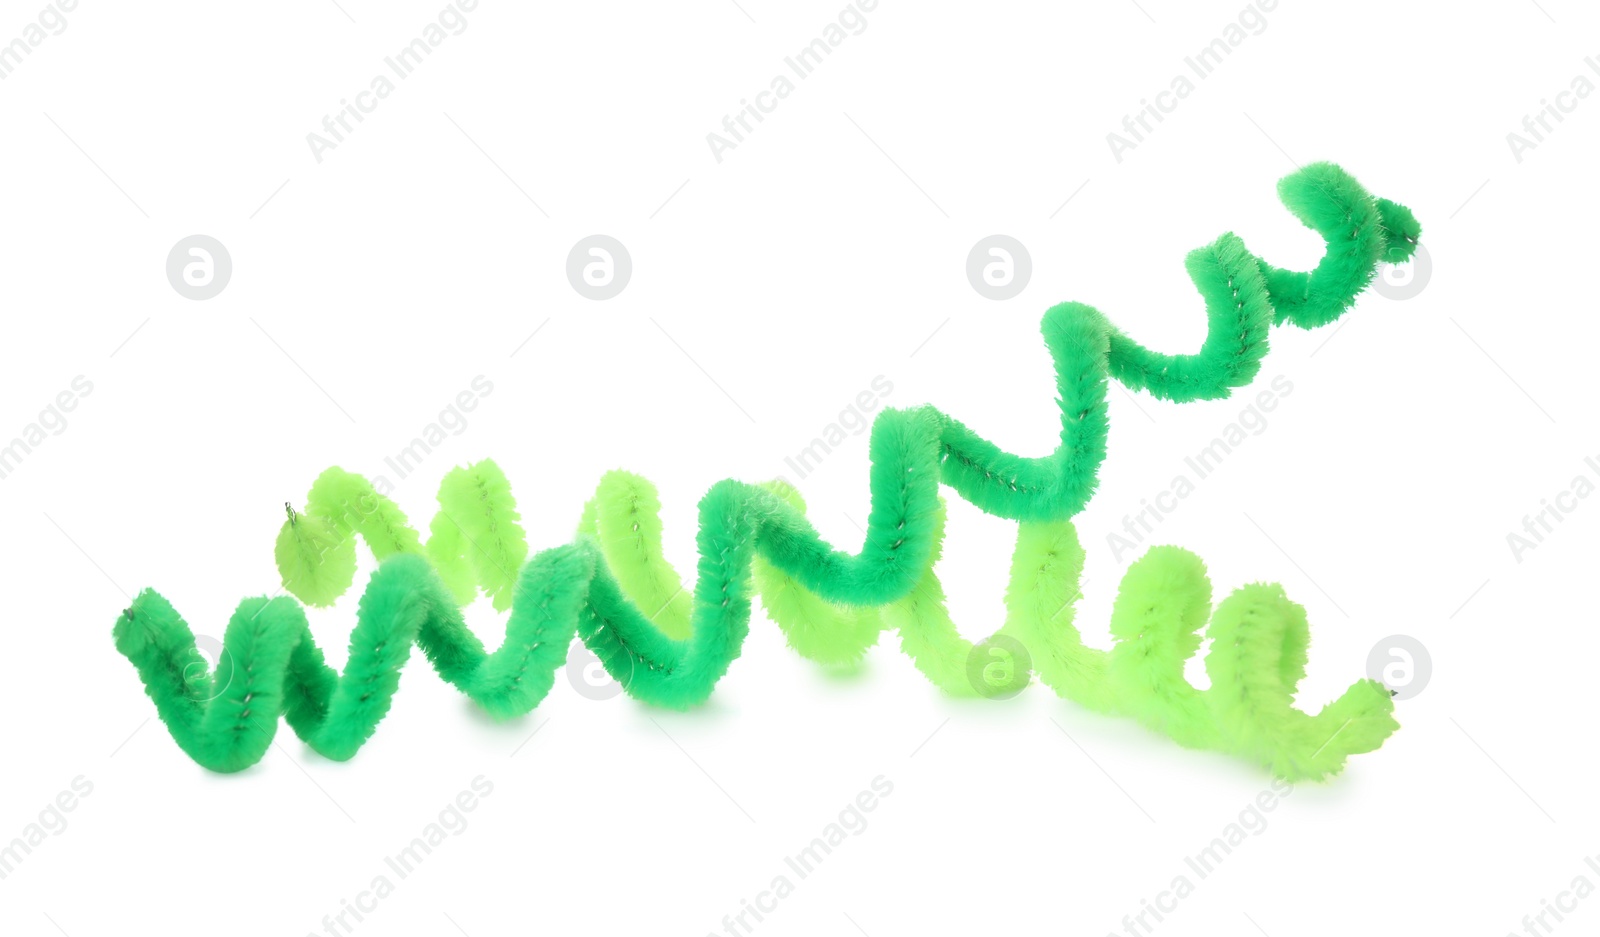 Photo of Colorful fluffy wires on white background. Party items